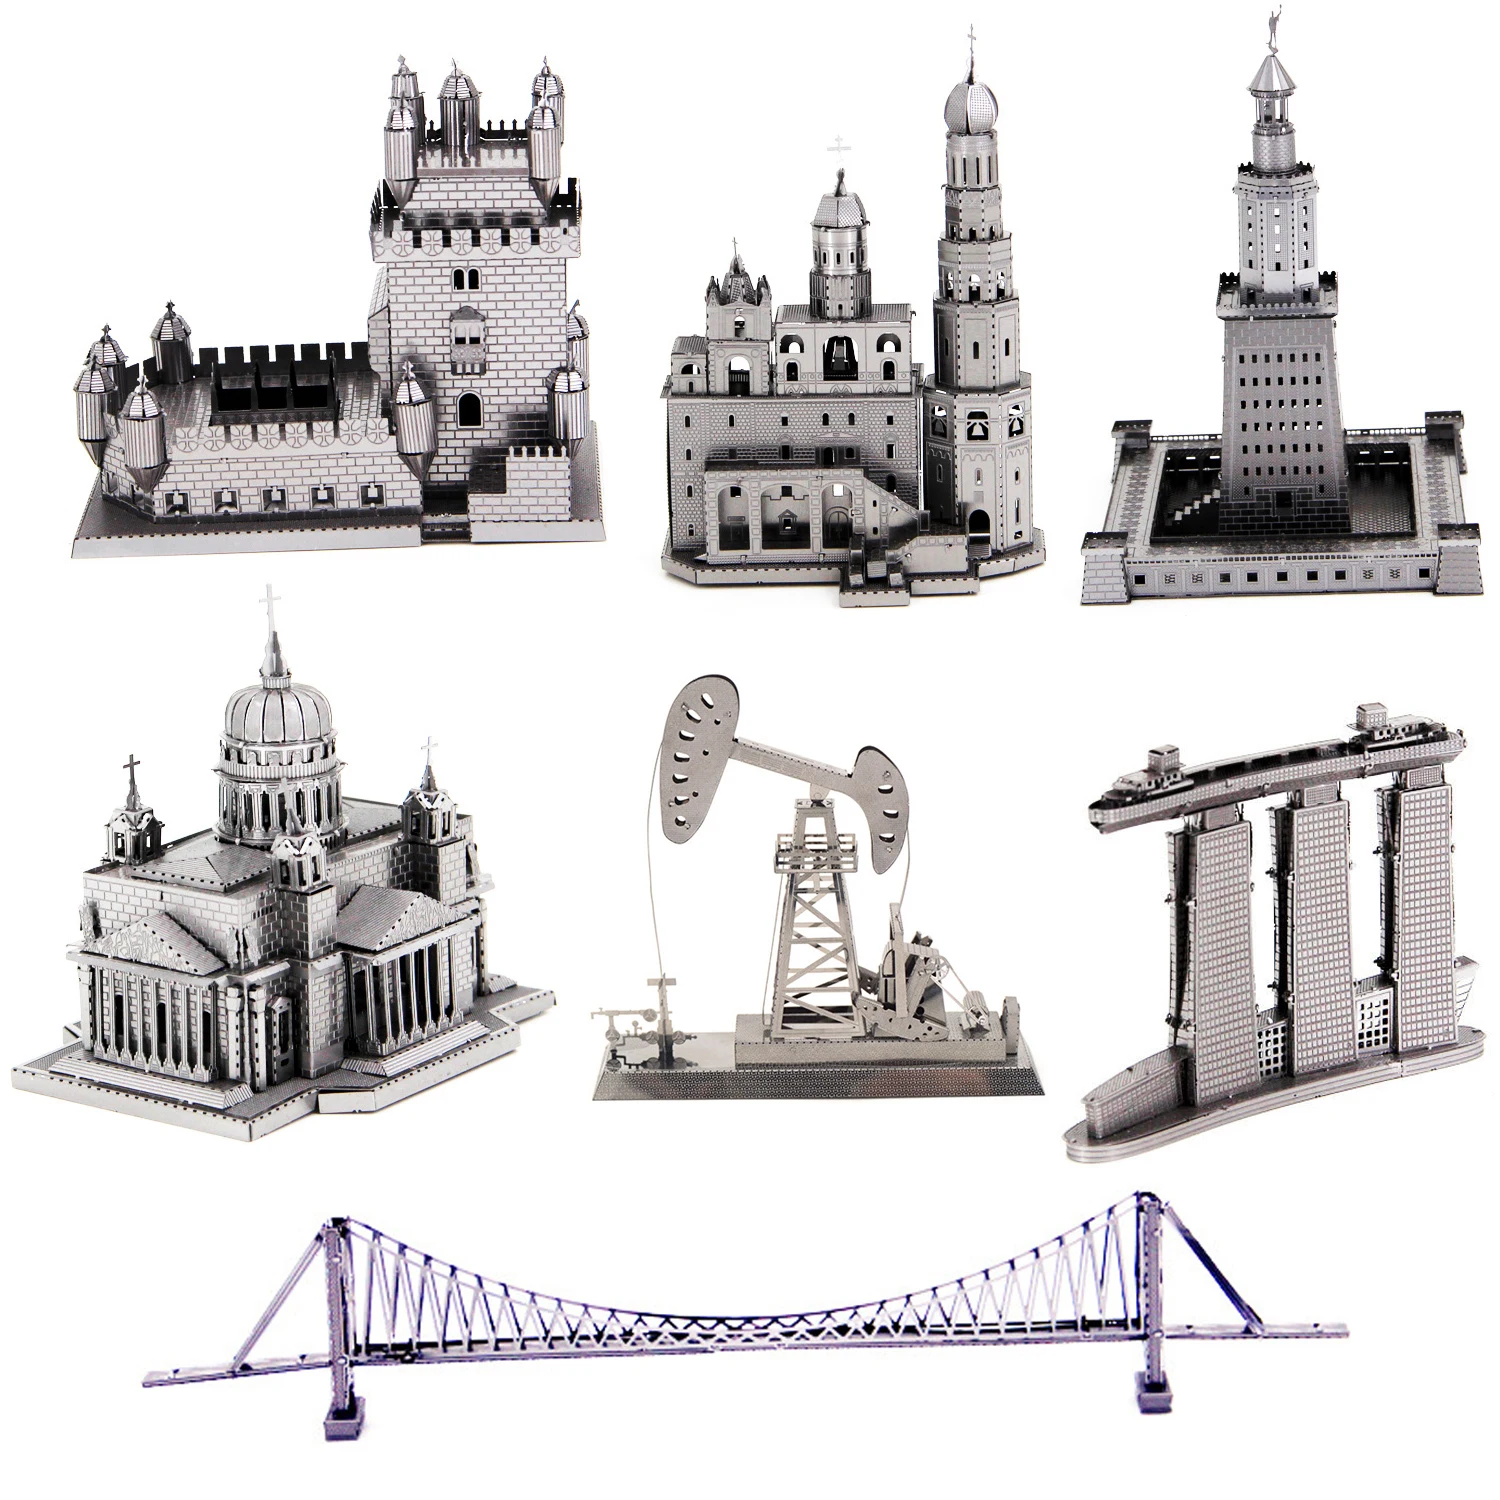 

Playground building 3D Metal Puzzle Roller Coaster Viking Drilling well model KITS Assemble Jigsaw Puzzle Gift Toys For Children